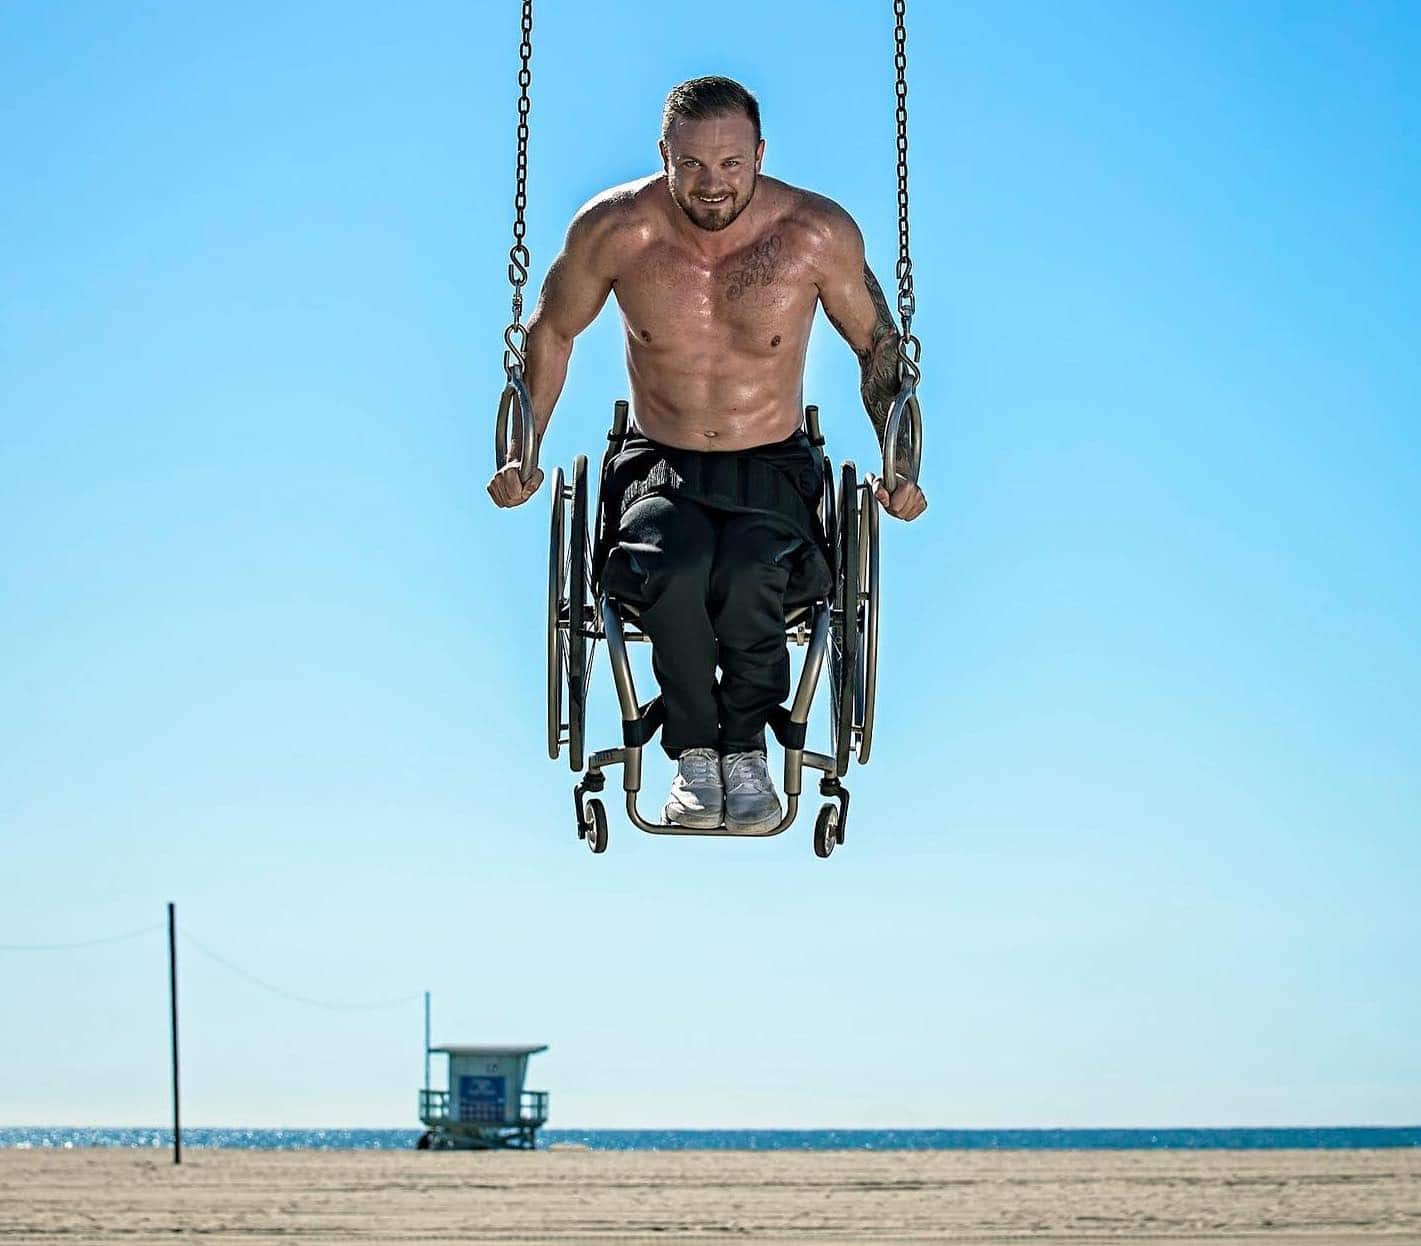 Richard Corbett is shirtless with black pants sitting in his wheelchair while doing a gymnastics ring hold at a beach